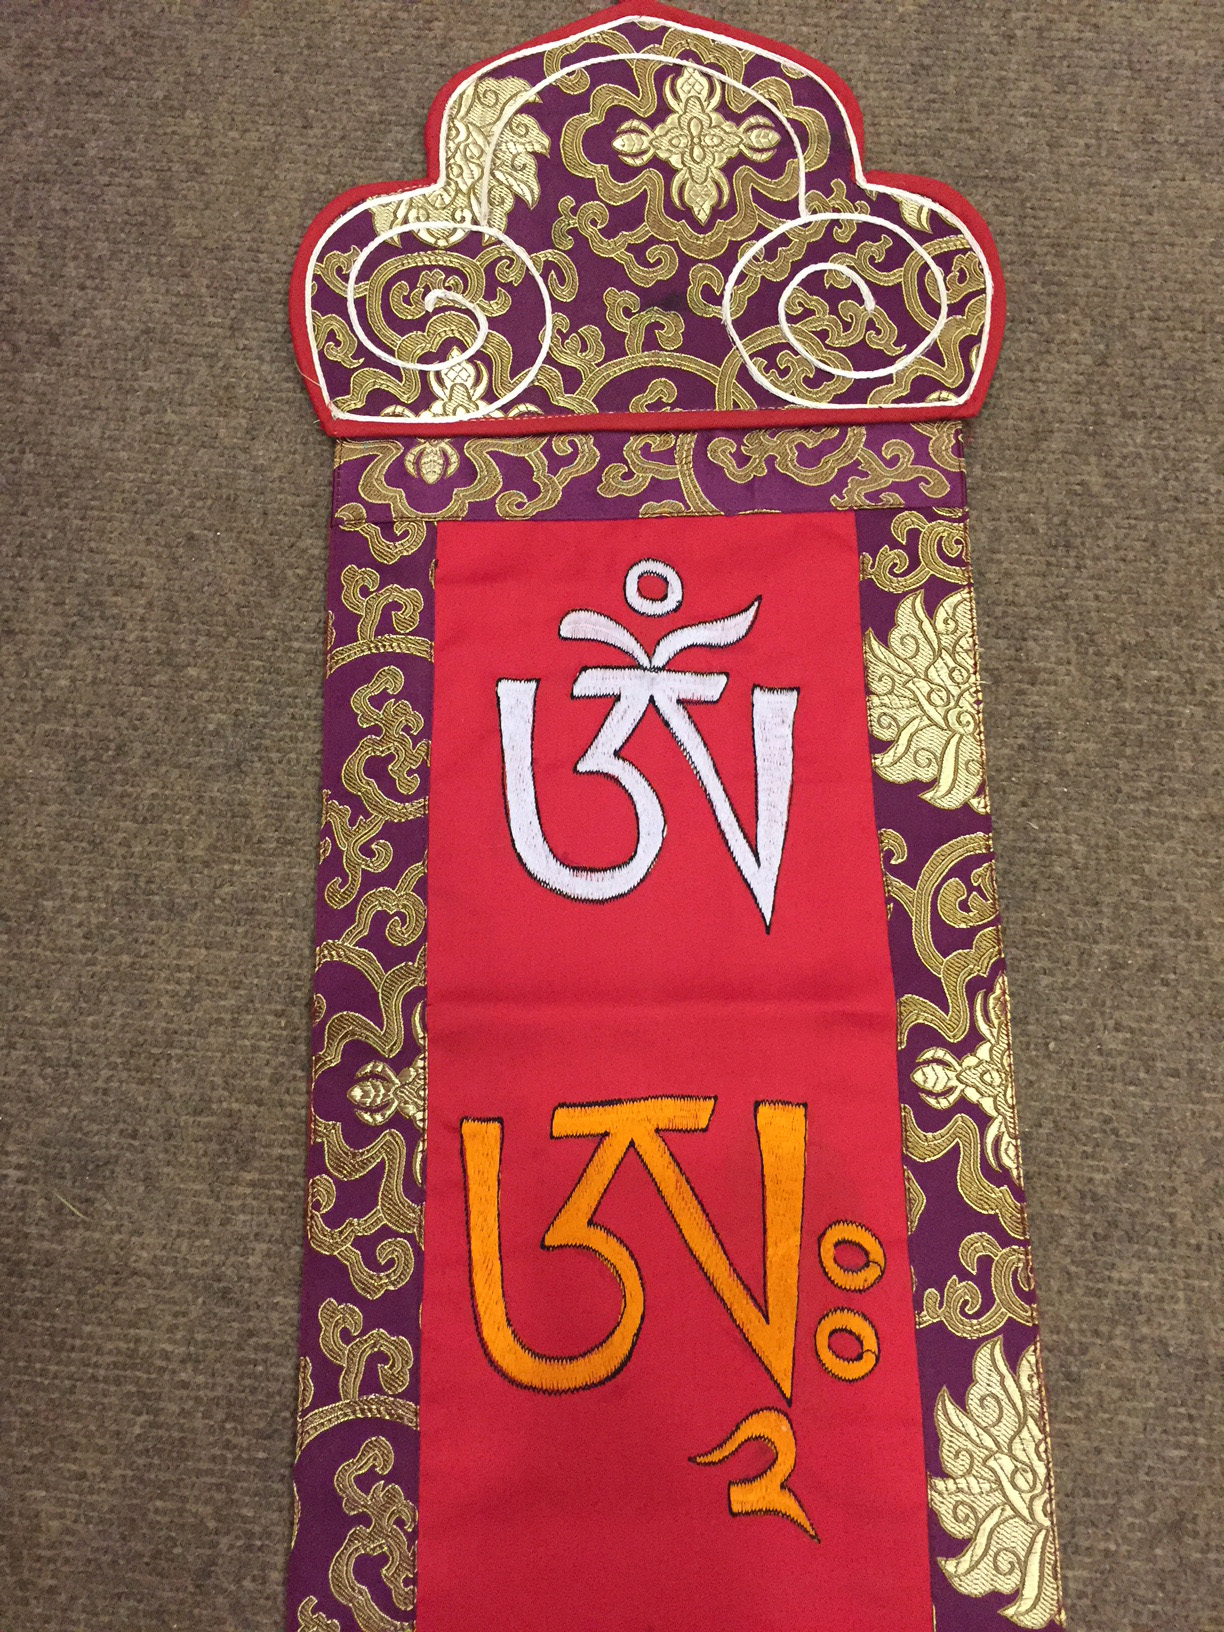 Tibetan Mantra Embroidered Om Ah Hum Wall Hanging